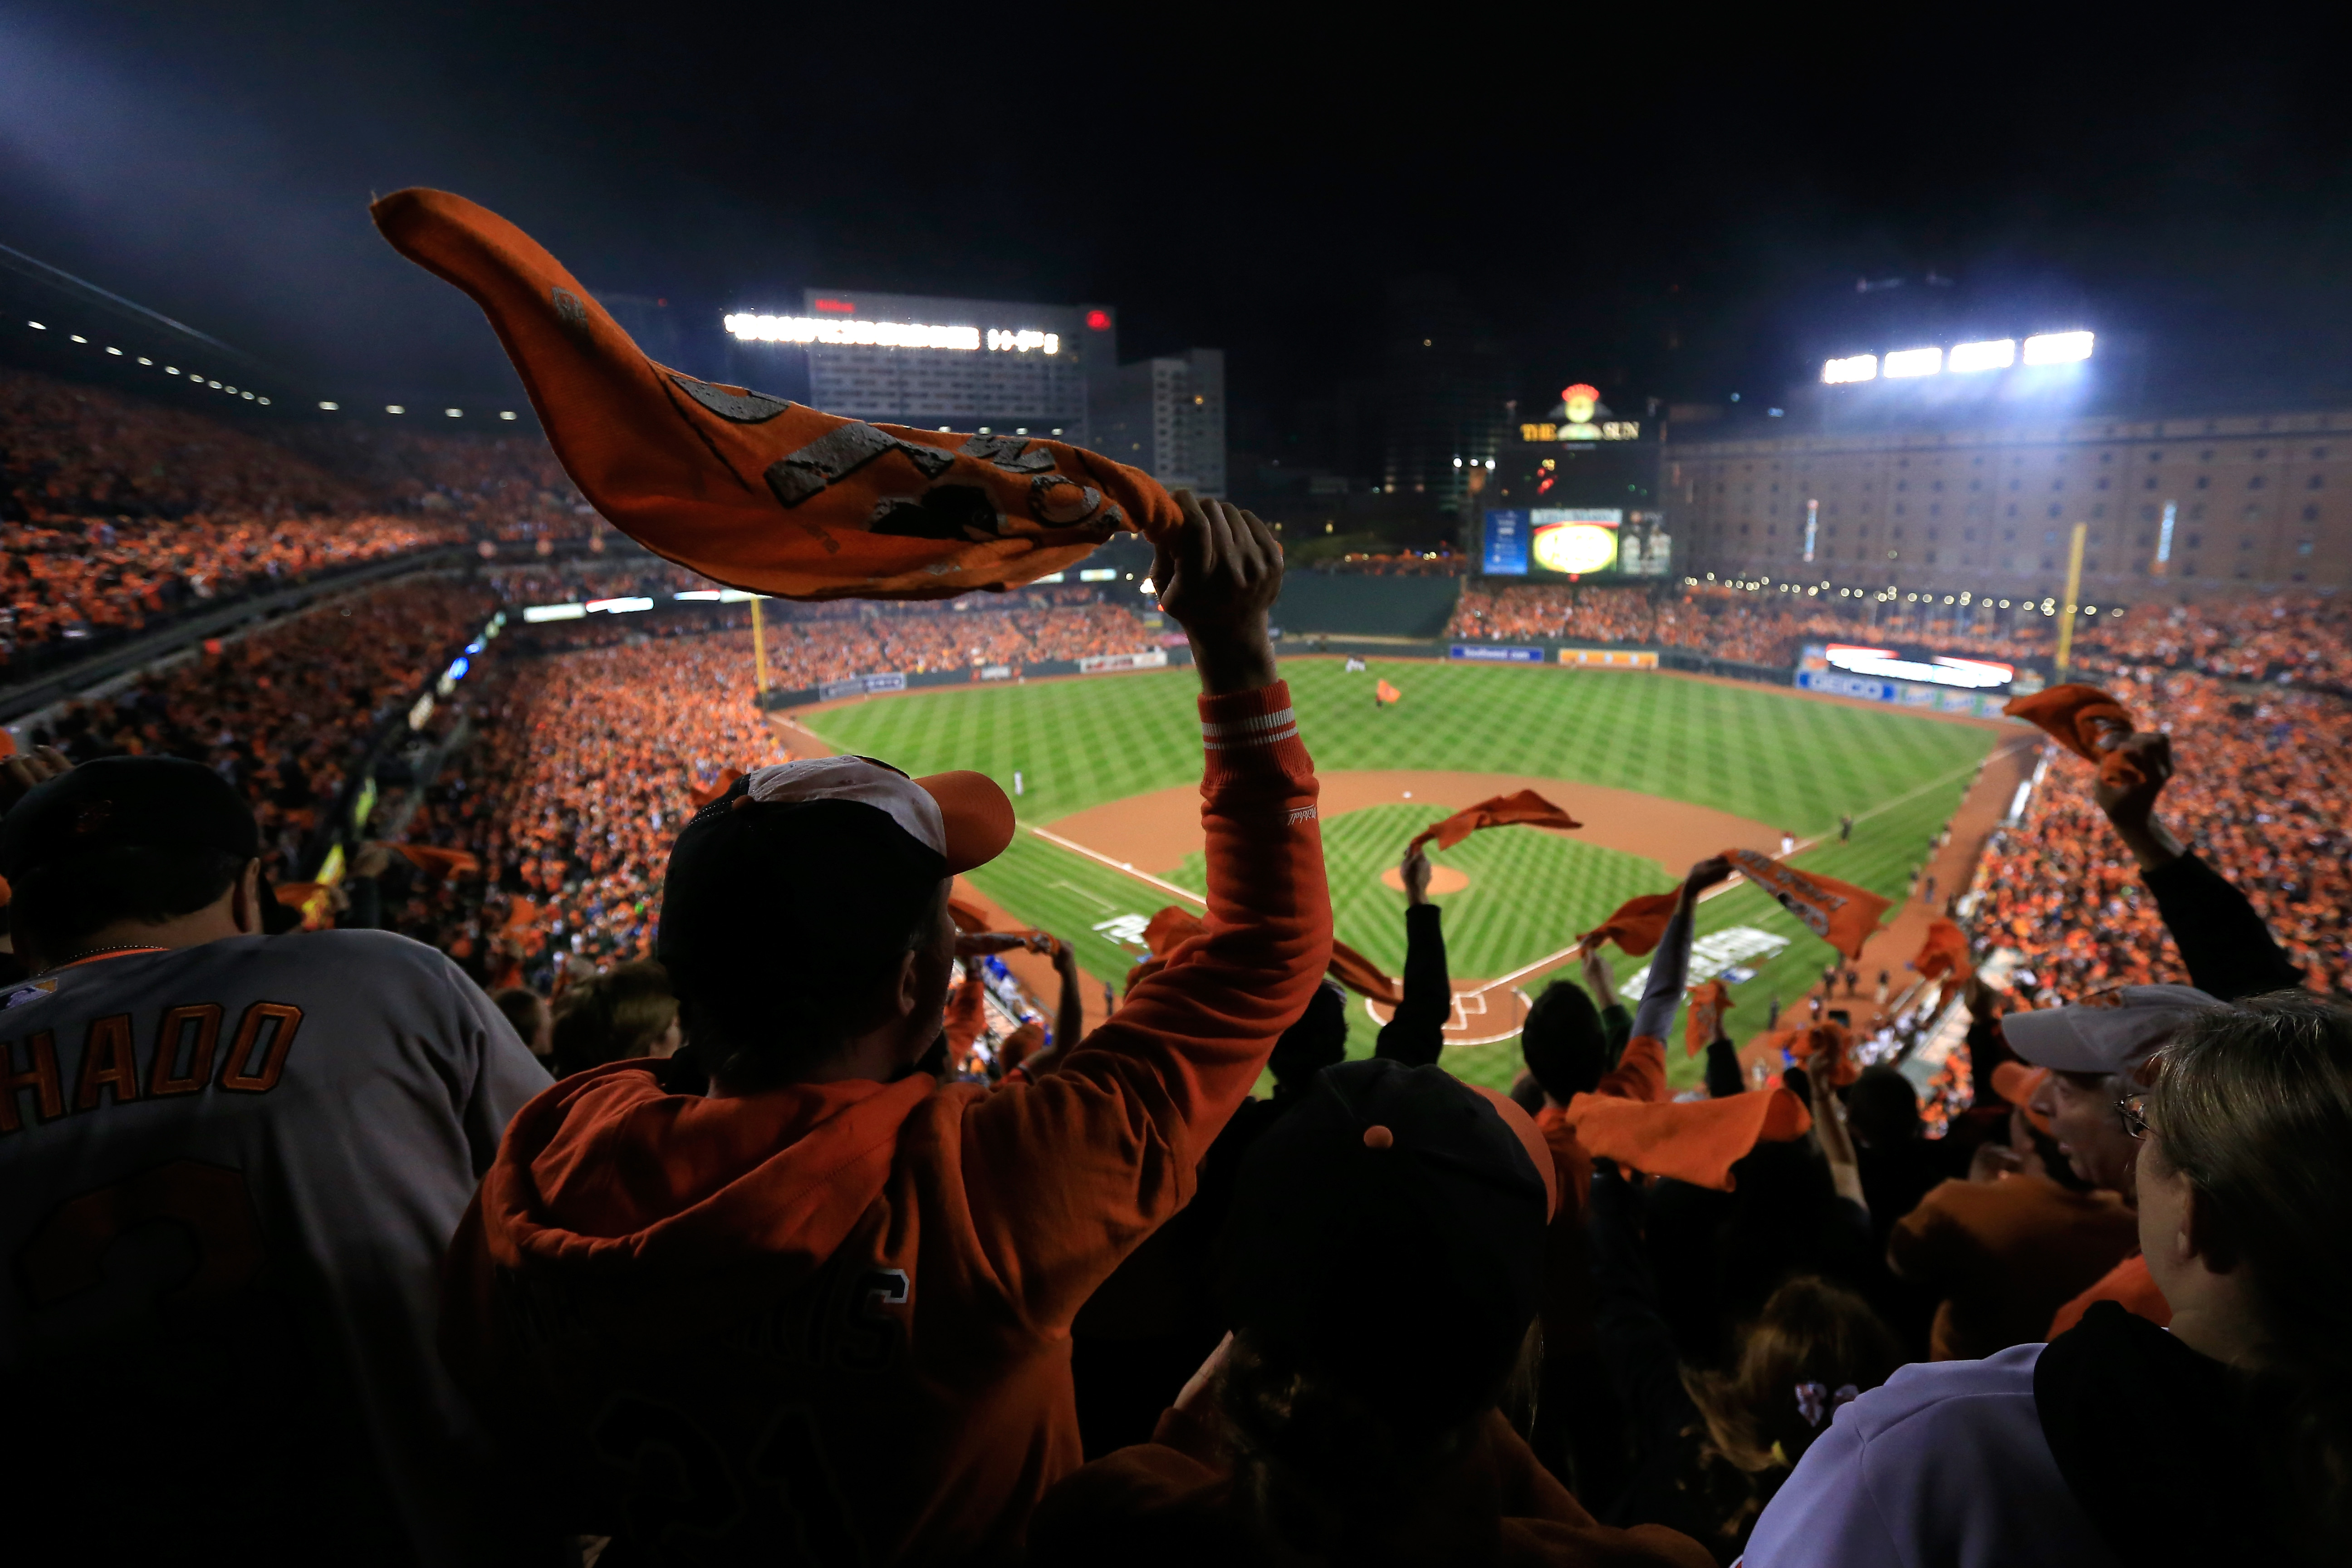 Baltimore Orioles must celebrate Oriole Park at Camden Yards with wins